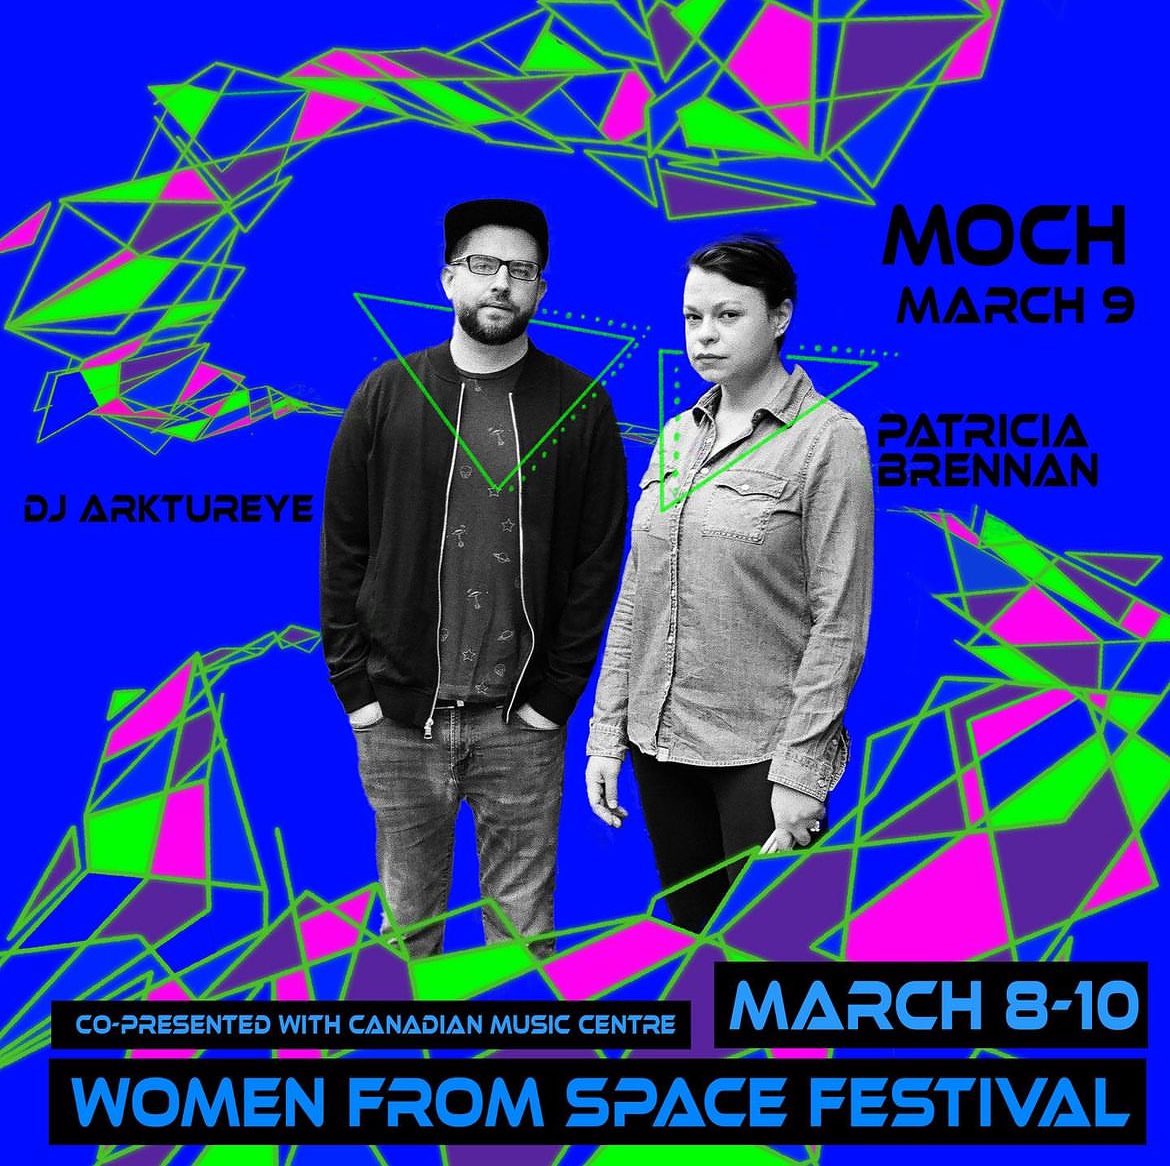 TONIGHT! Performing with my collaborative duo MOCH with drummer, percussionist & electronic musician Arktureye (Noel Brennan) @918Bathurst in Toronto, Canada as part of the @womenfromspace festival!✨Our set is at 8:45PM. For more info: womenfromspace.com #SaturdayVibes